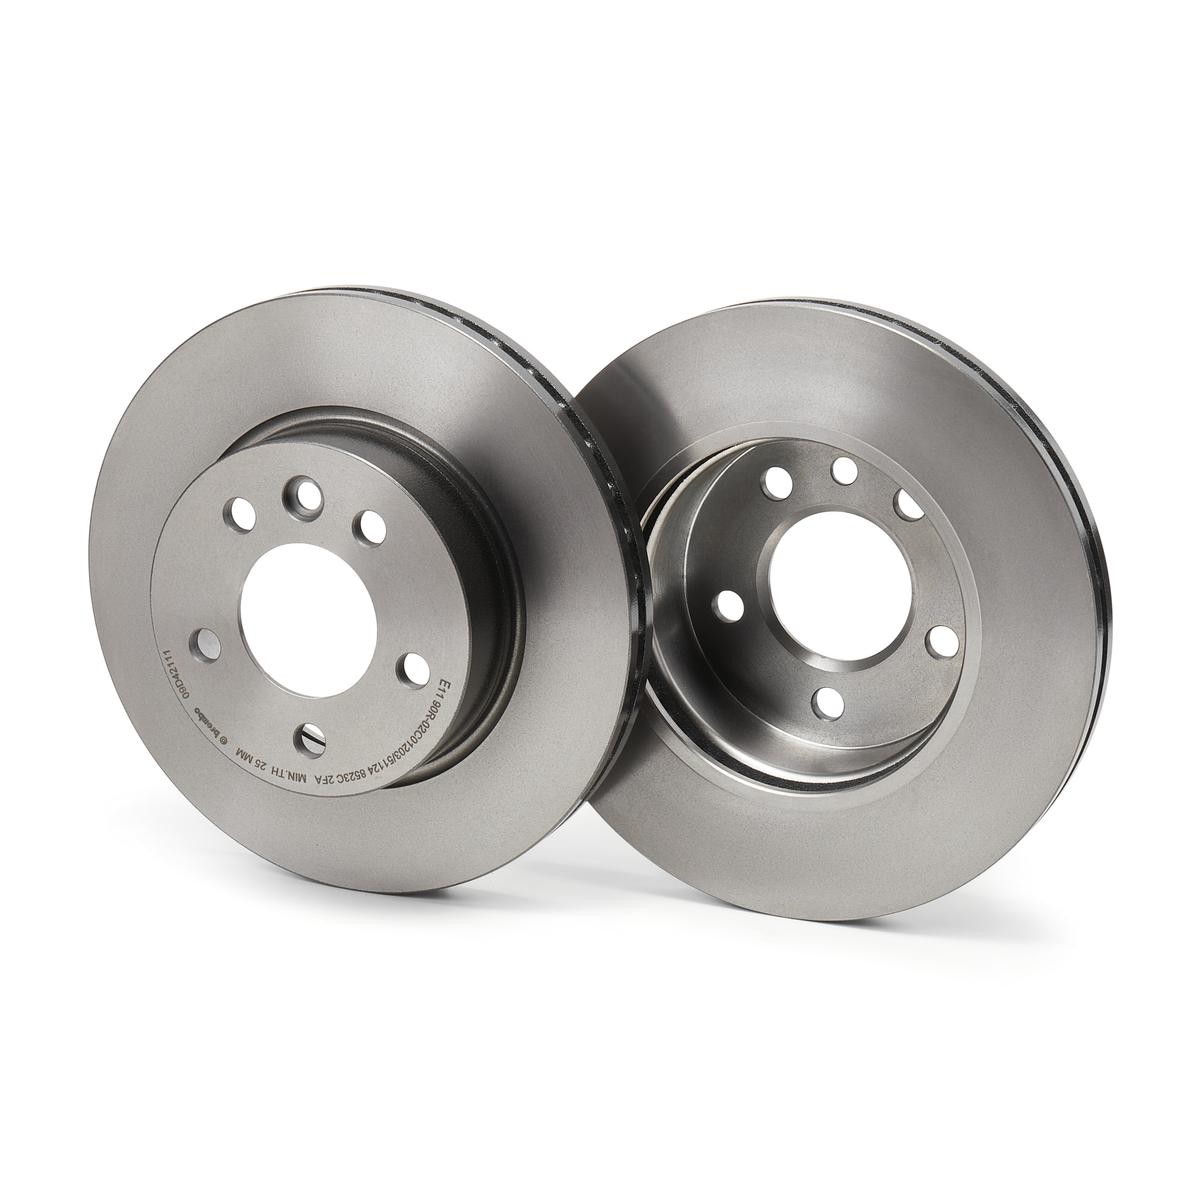 09.D421.11 Brake discs 09.D421.11 BREMBO 303x28mm, 5, internally vented, Coated, High-carbon